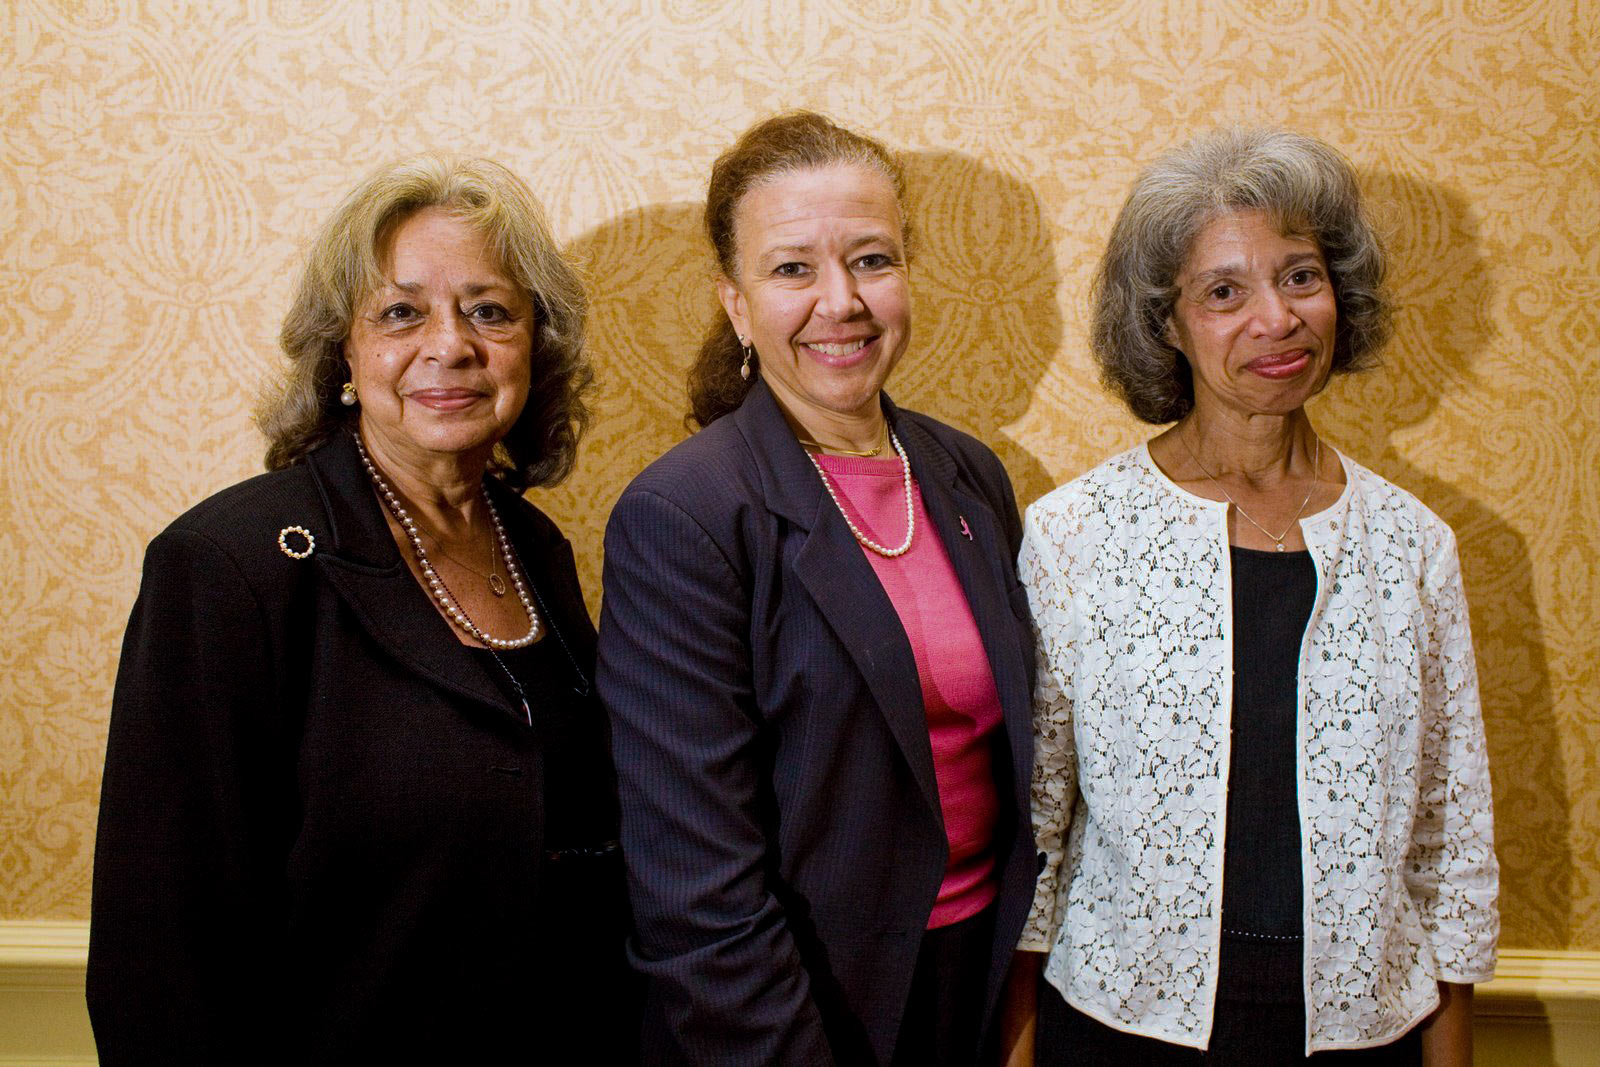 Dr. Vivian Pinn, left, and Dr. Barbara Favazza, right,  Susan “Syd” Dorsey, center, pose together for a picture